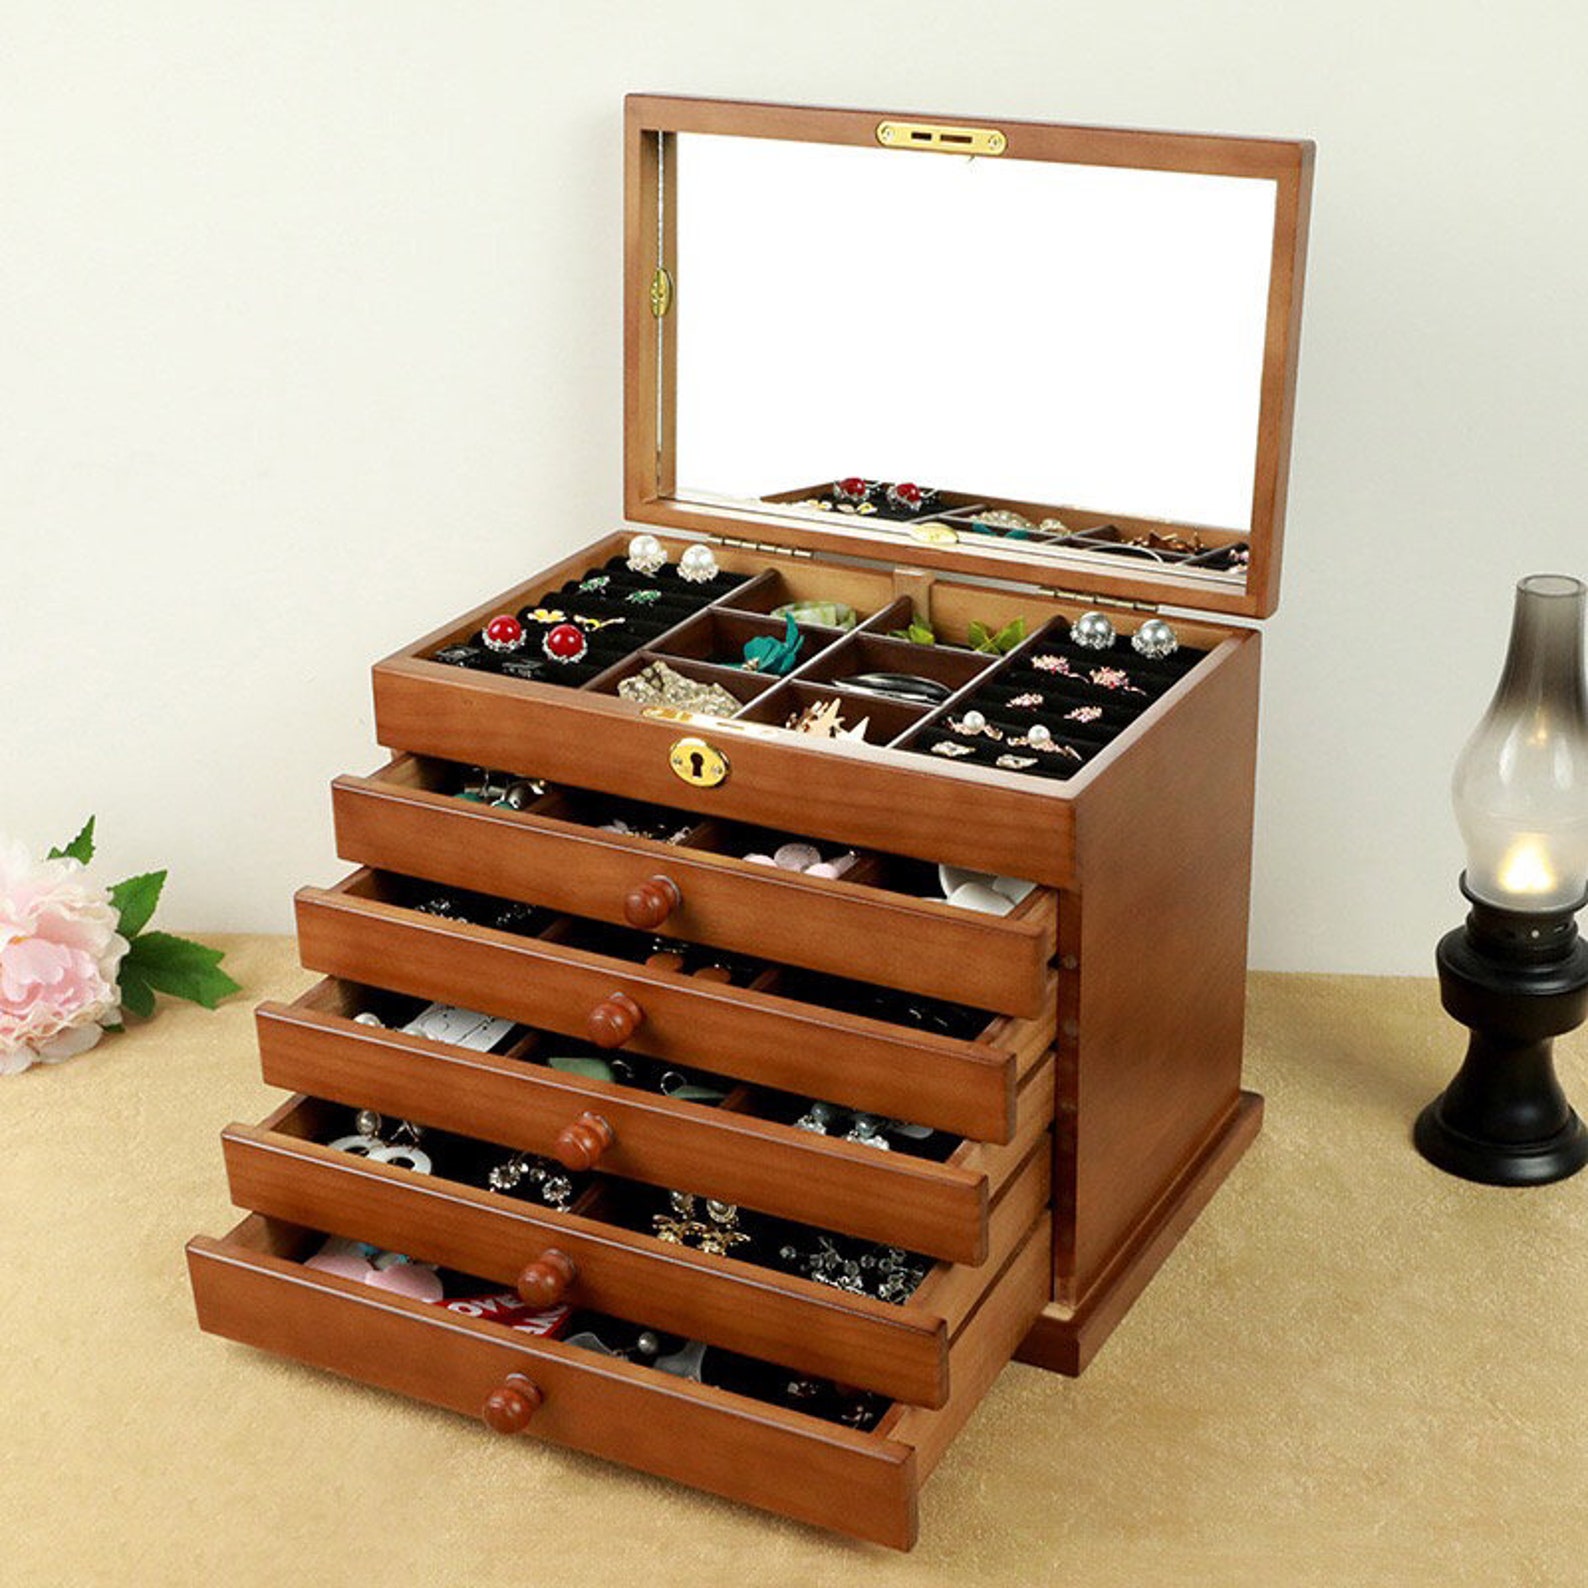 Vintage Jewelry Organizer Box With Makeup Mirror Wooden - Etsy